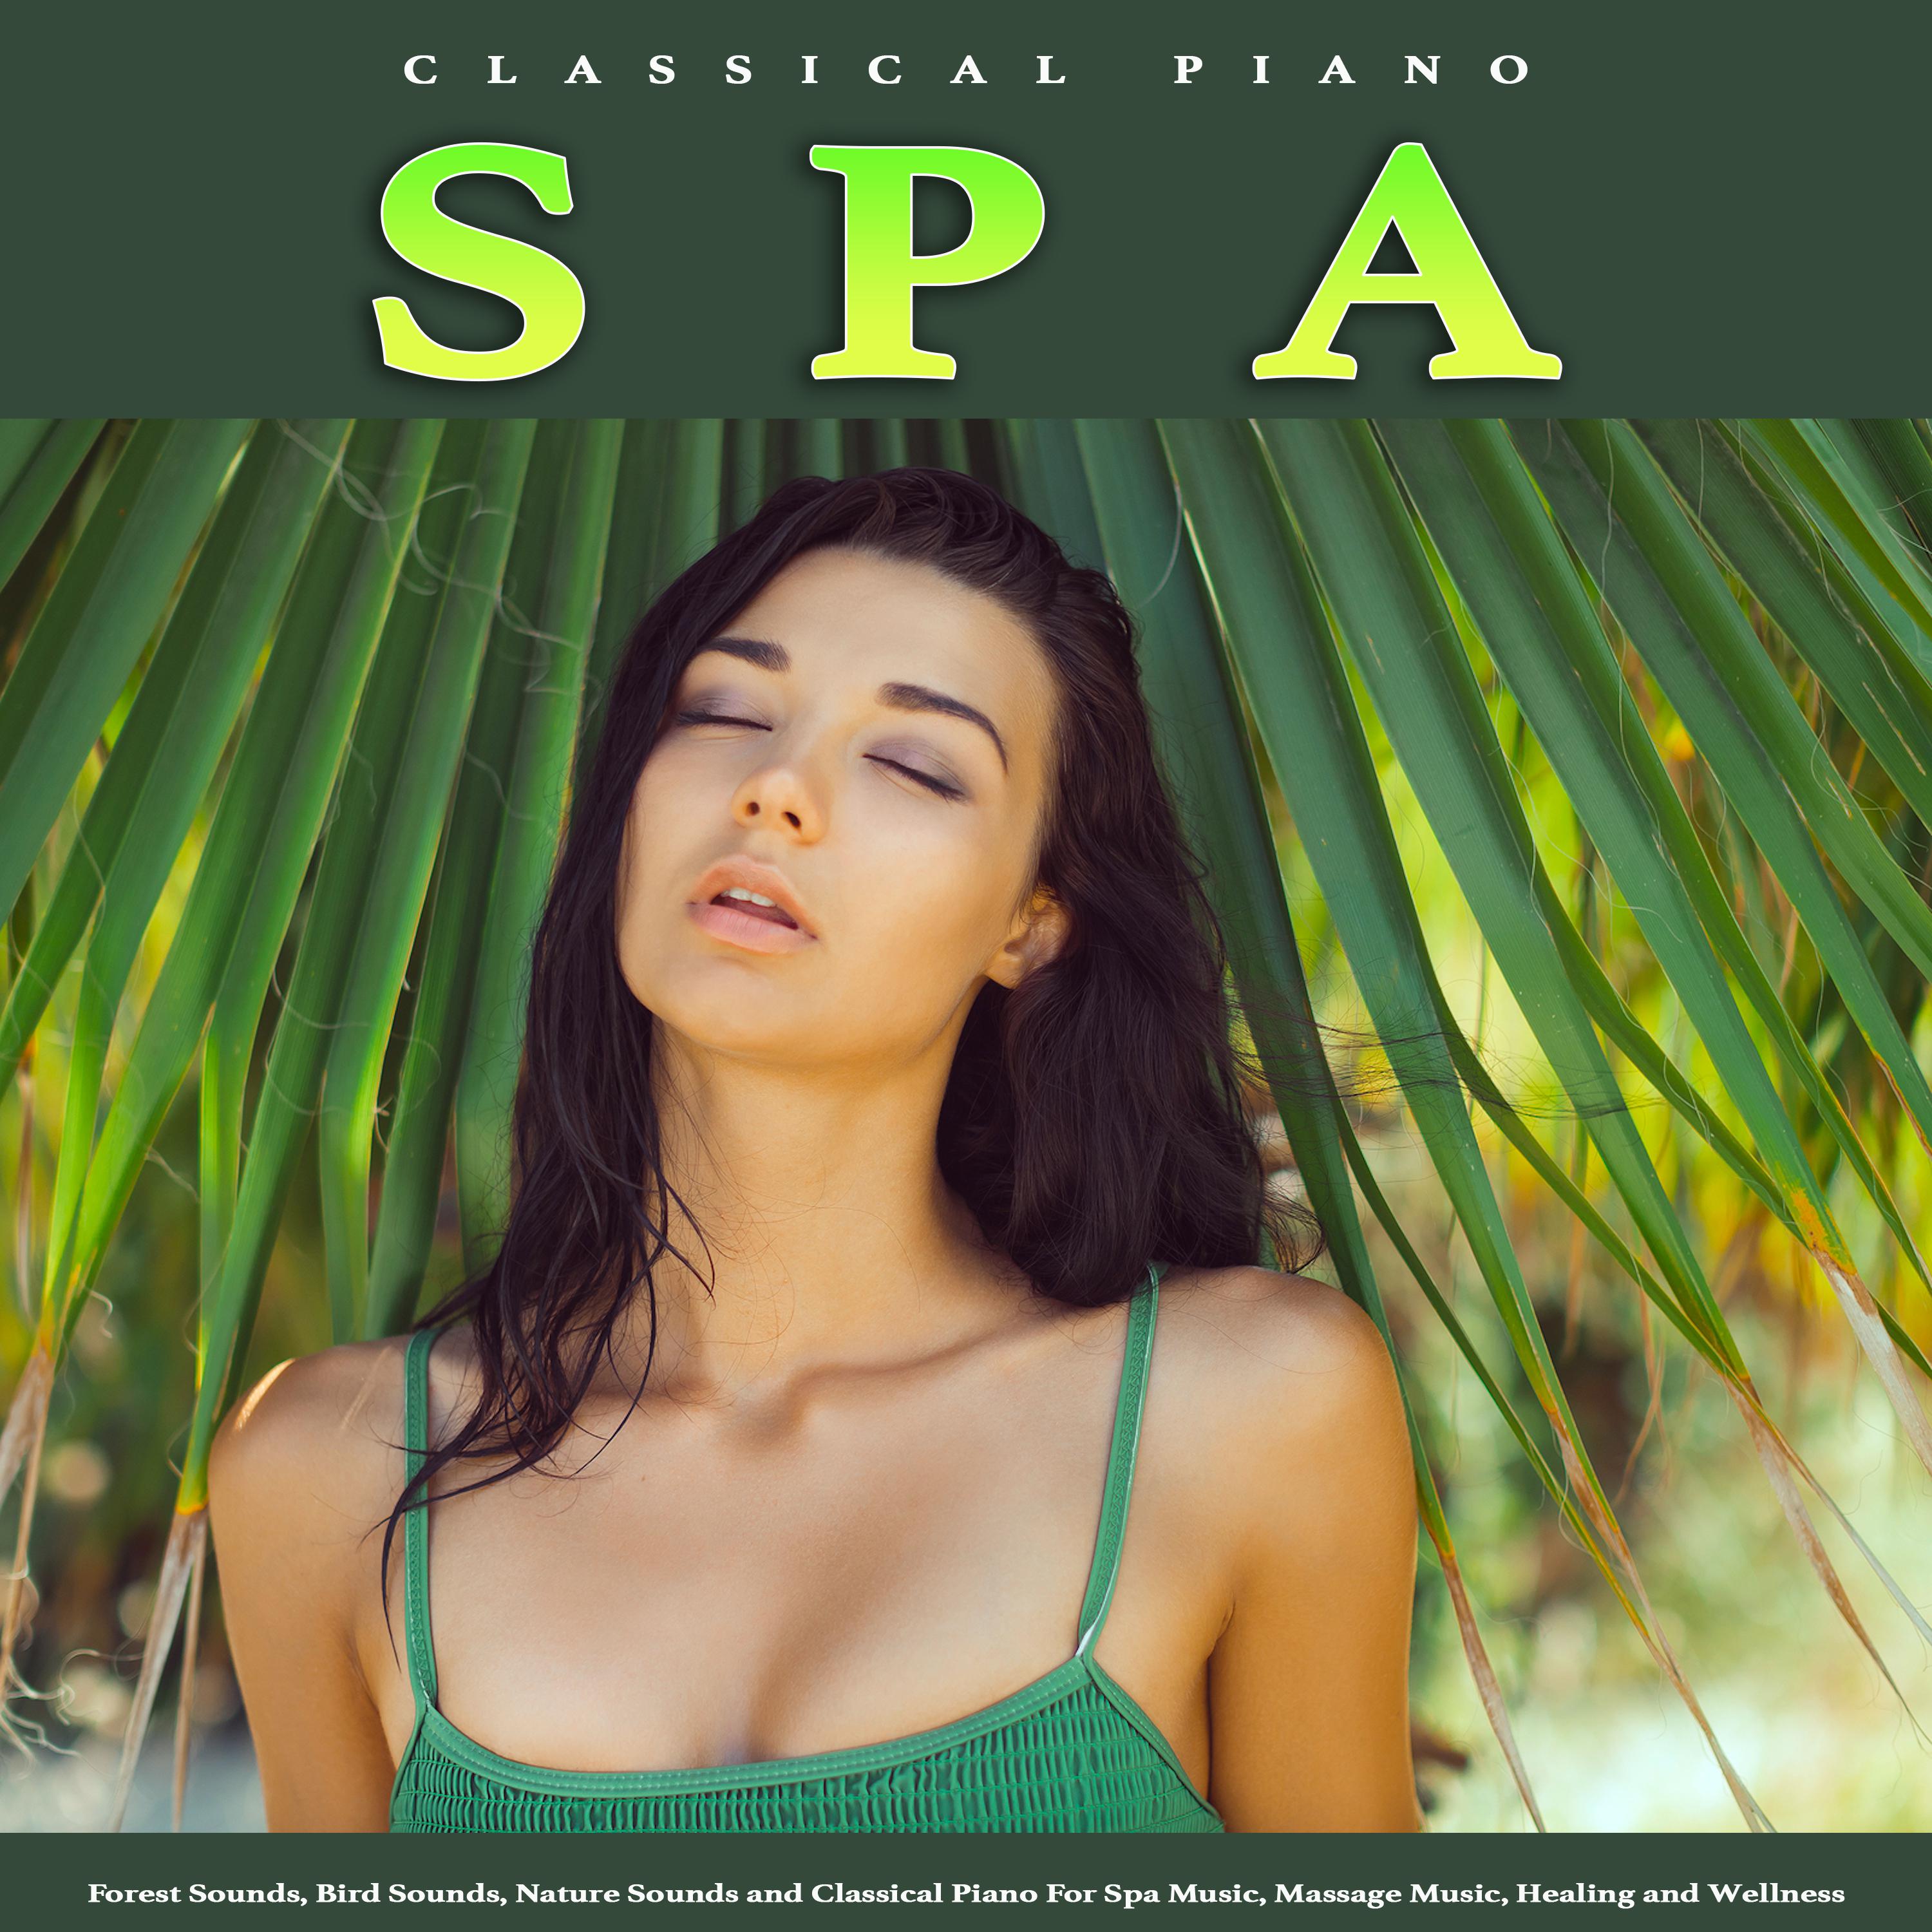 Aria - Bach - Spa Music For Spa - Massage Music - Classical Piano and Nature Sounds For Spa